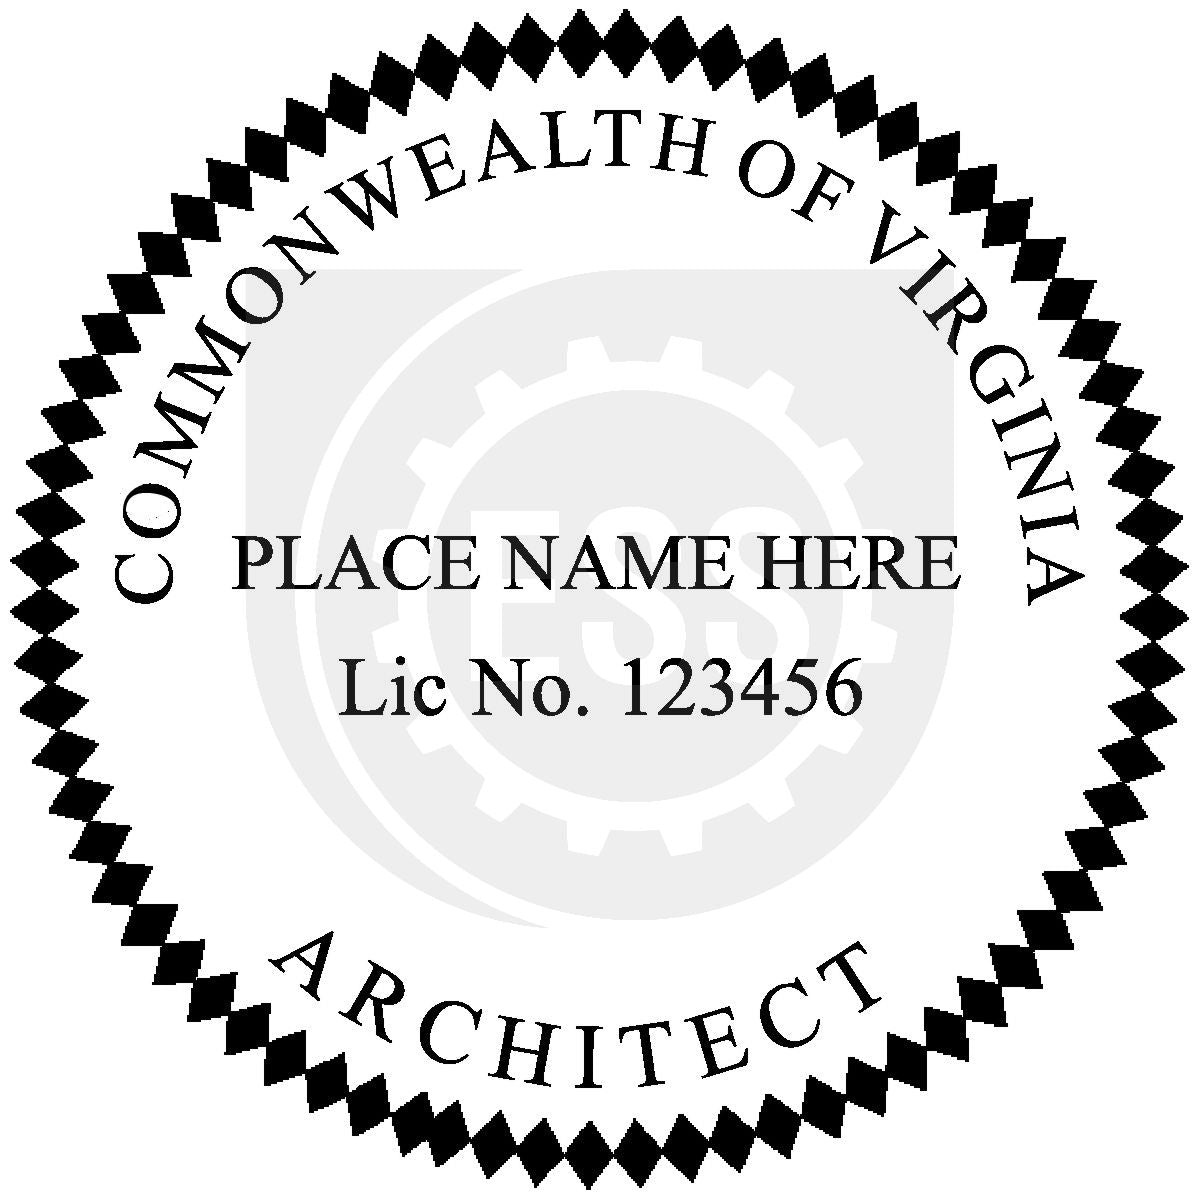 Virginia Archtiect Seal Setup